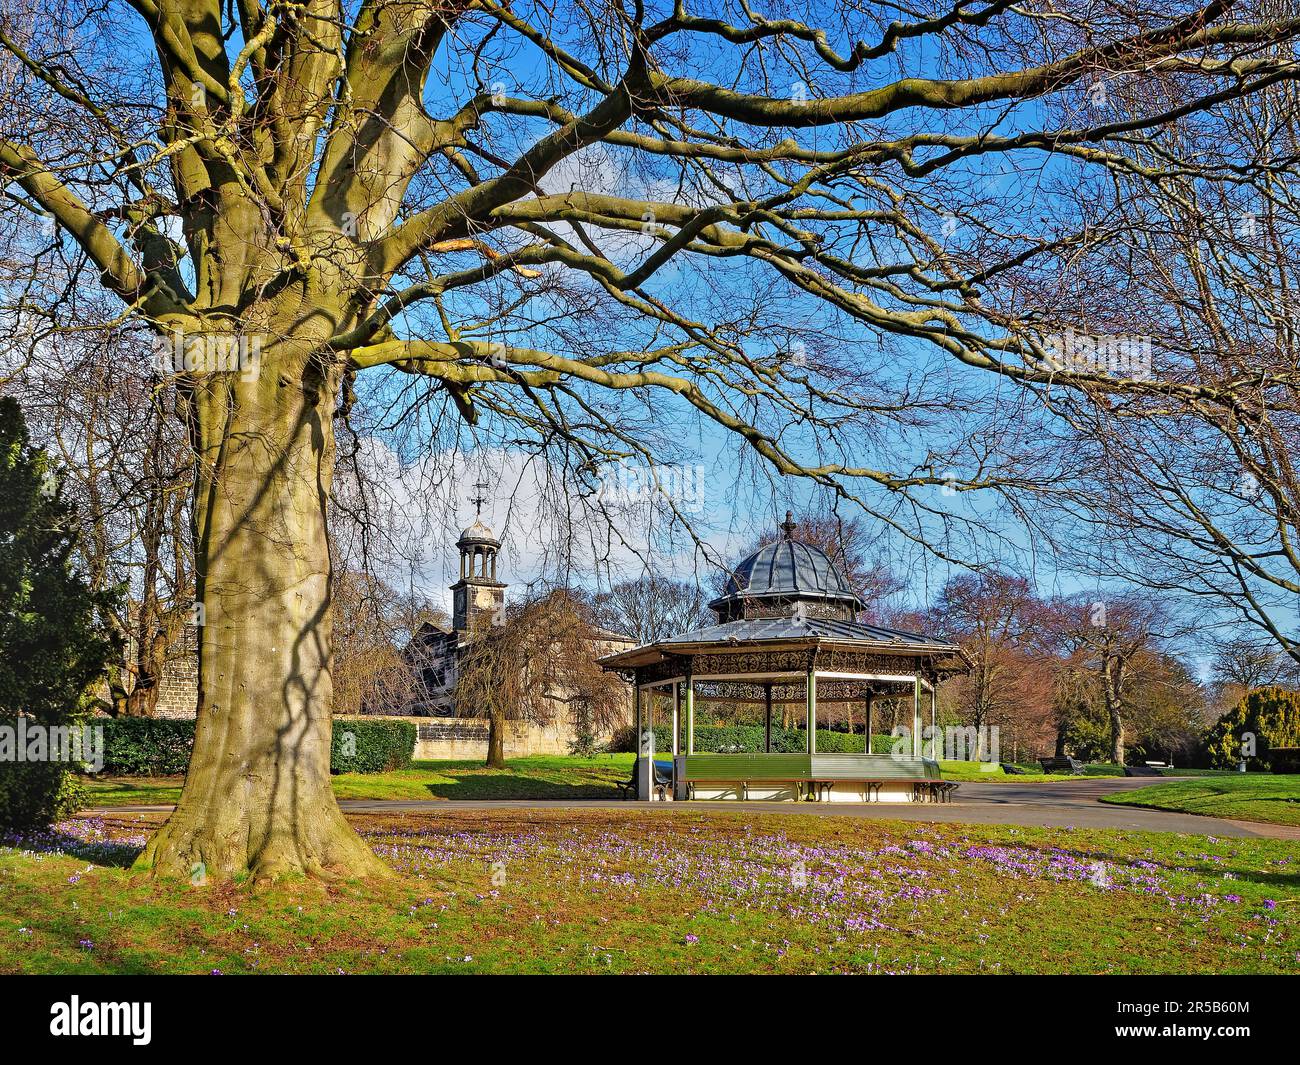 UK, West Yorkshire, Leeds, Roundhay Park, Bandstand and Coach House. Stock Photo